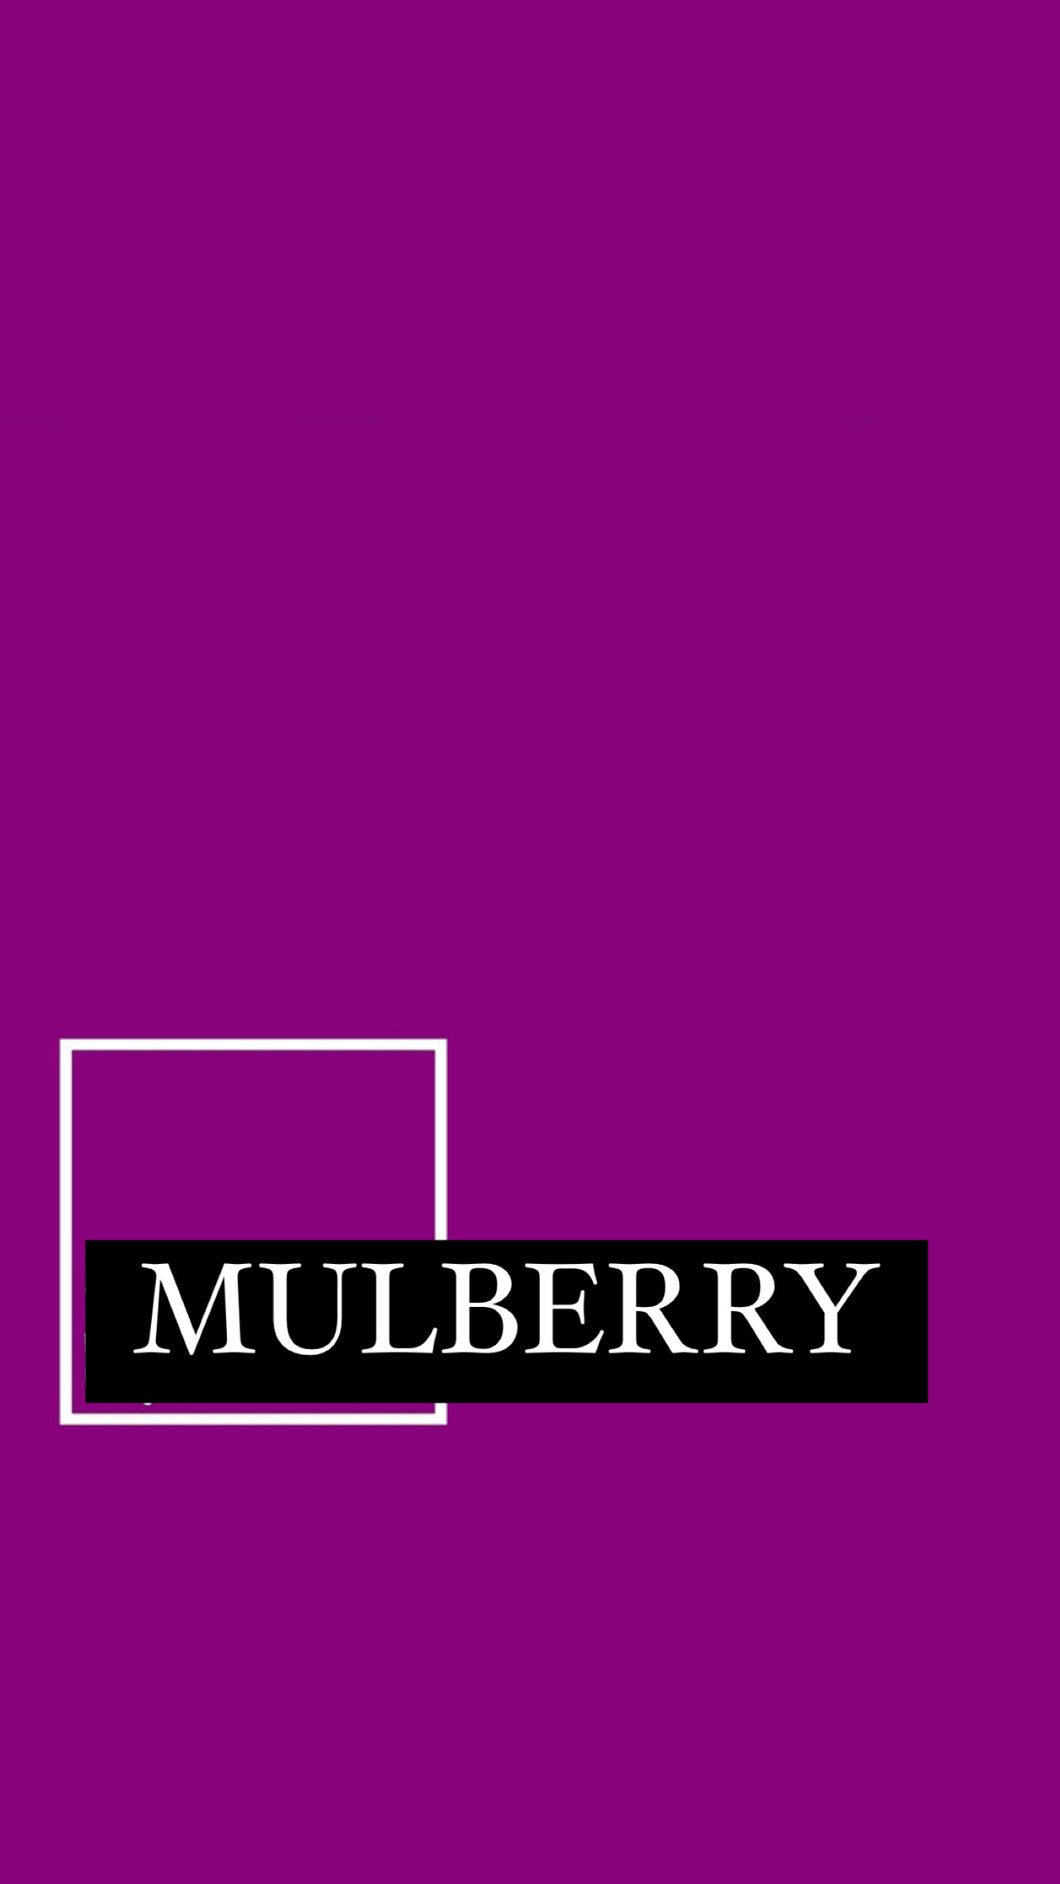 Name Tags for Cloth Nappies - MULBERRY